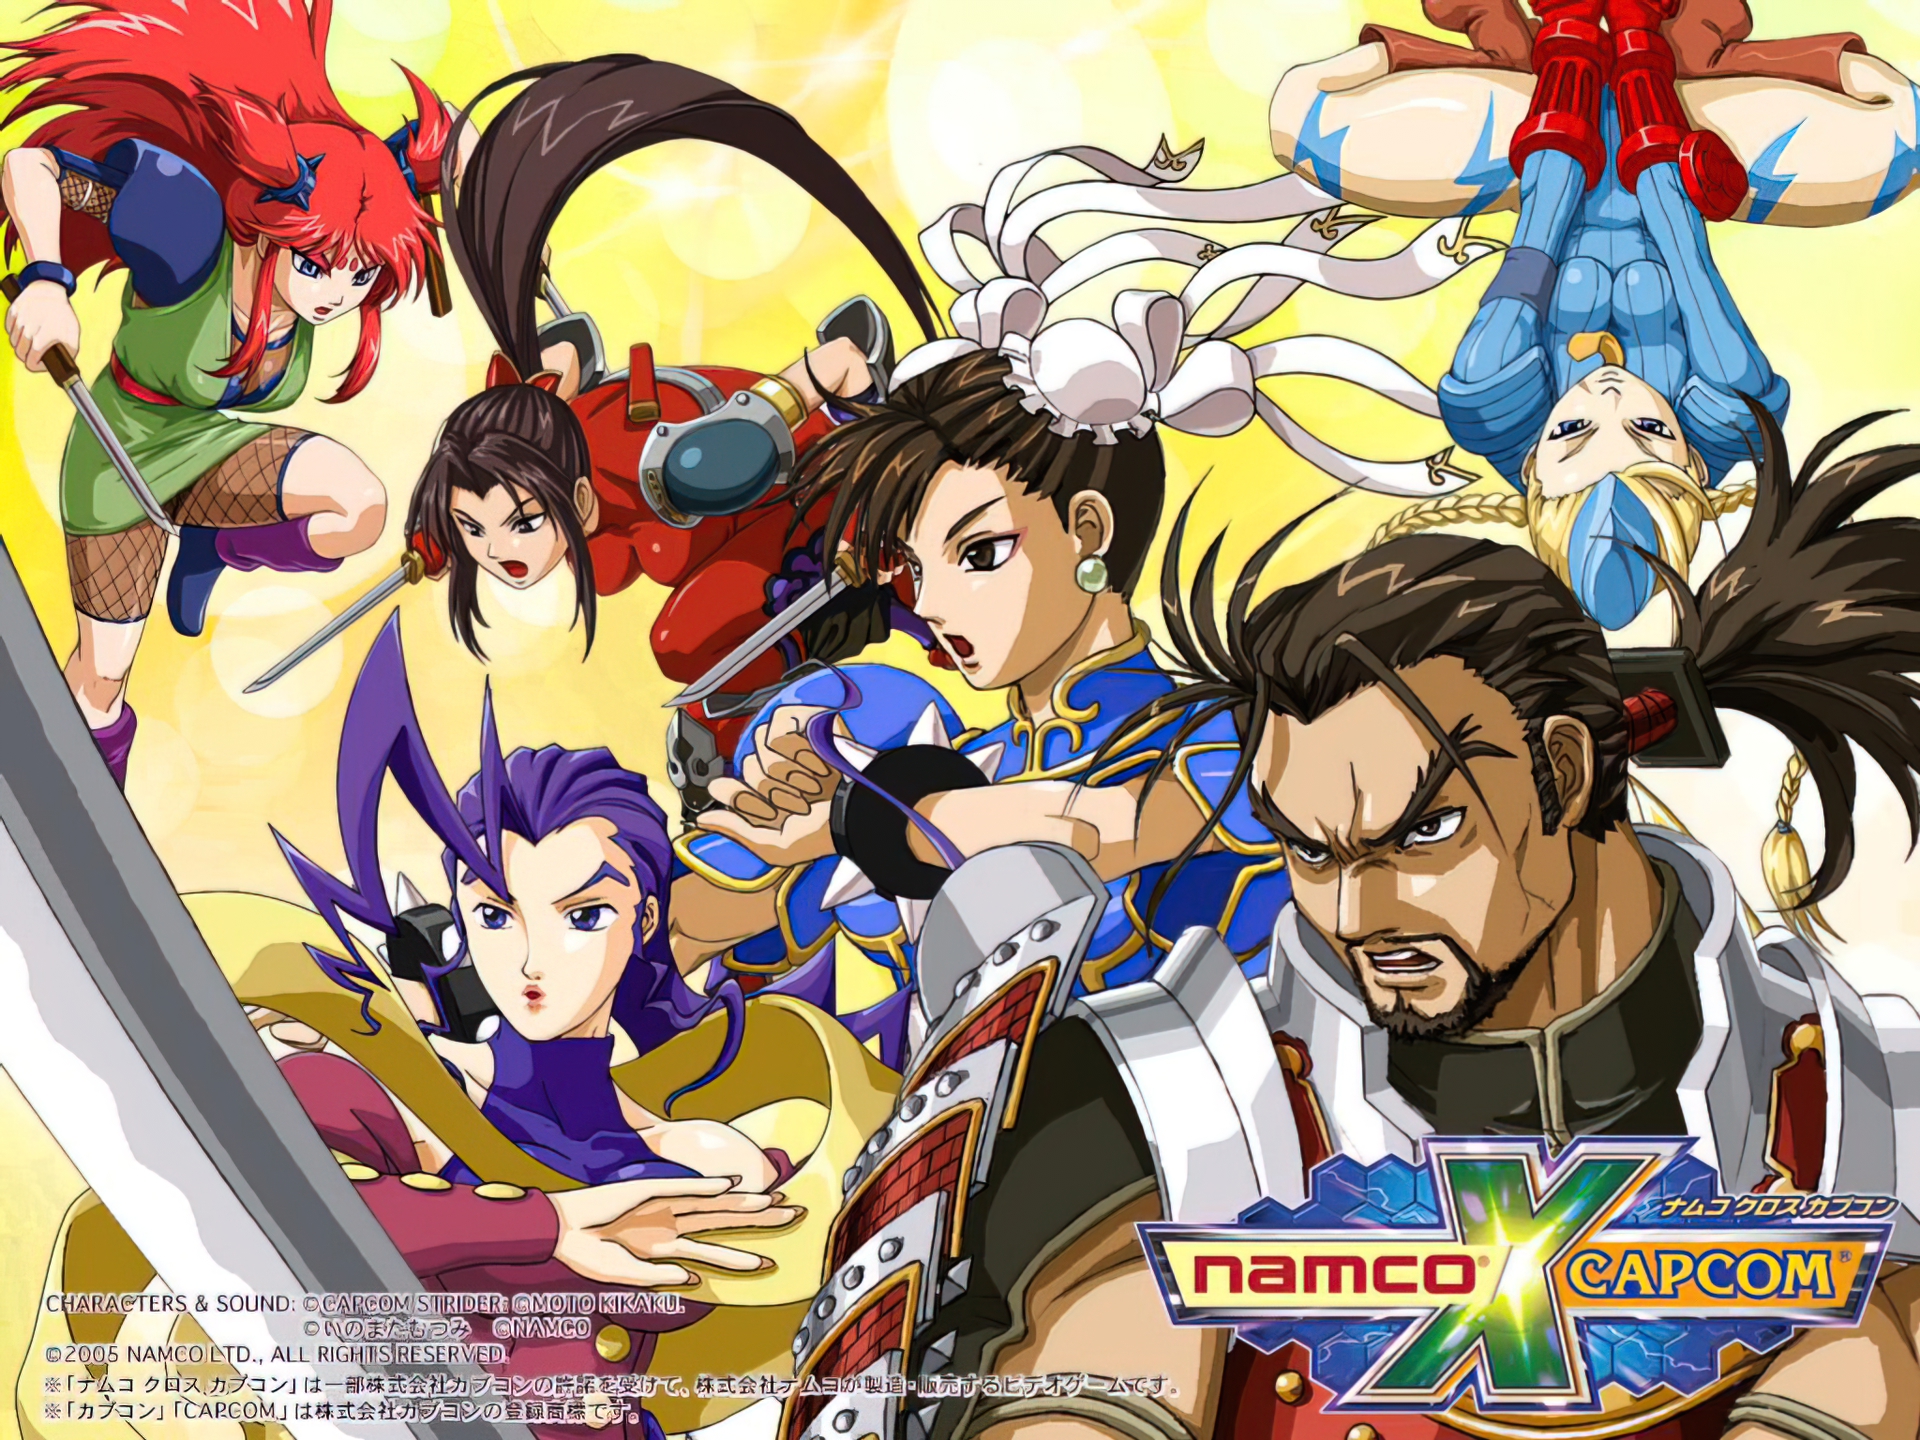 4 Namco X Capcom HD Wallpapers | Backgrounds - Wallpaper Abyss